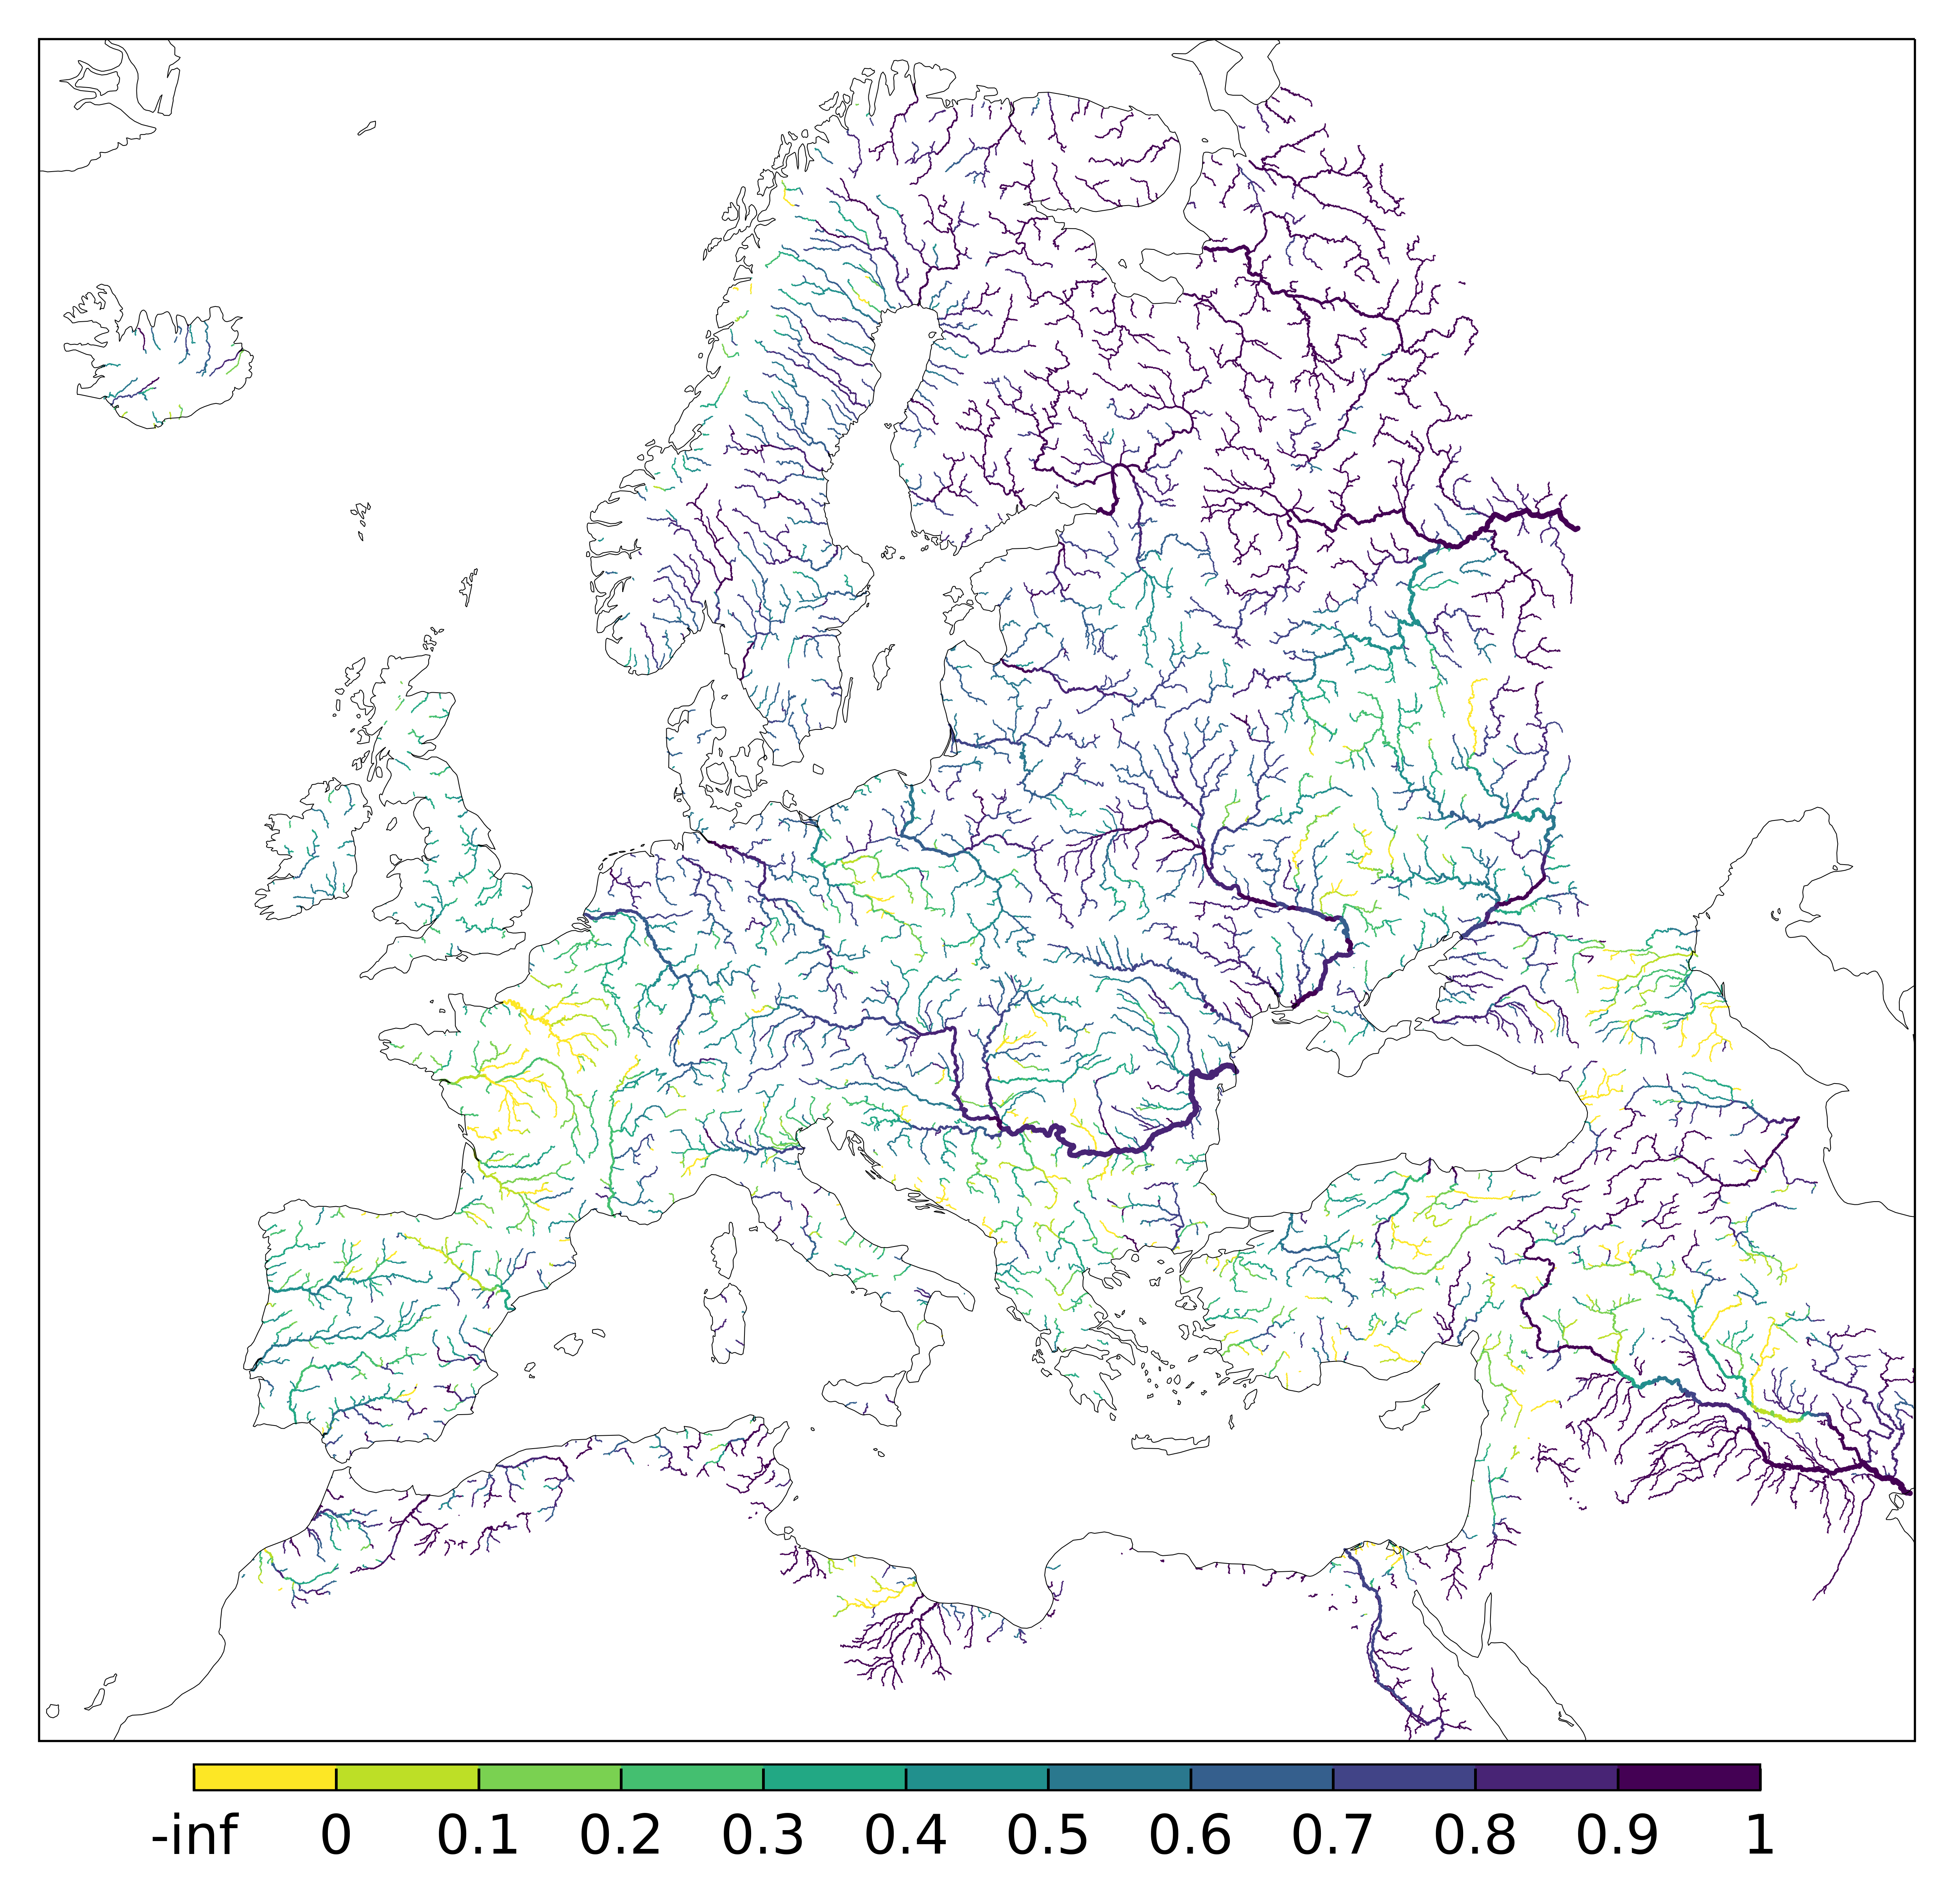 Figure 4. EFAS CRPSS at lead-time 10 day for January 2024 across the EFAS domain for catchments larger than 1000km2. Climatology is used as the reference forecast.